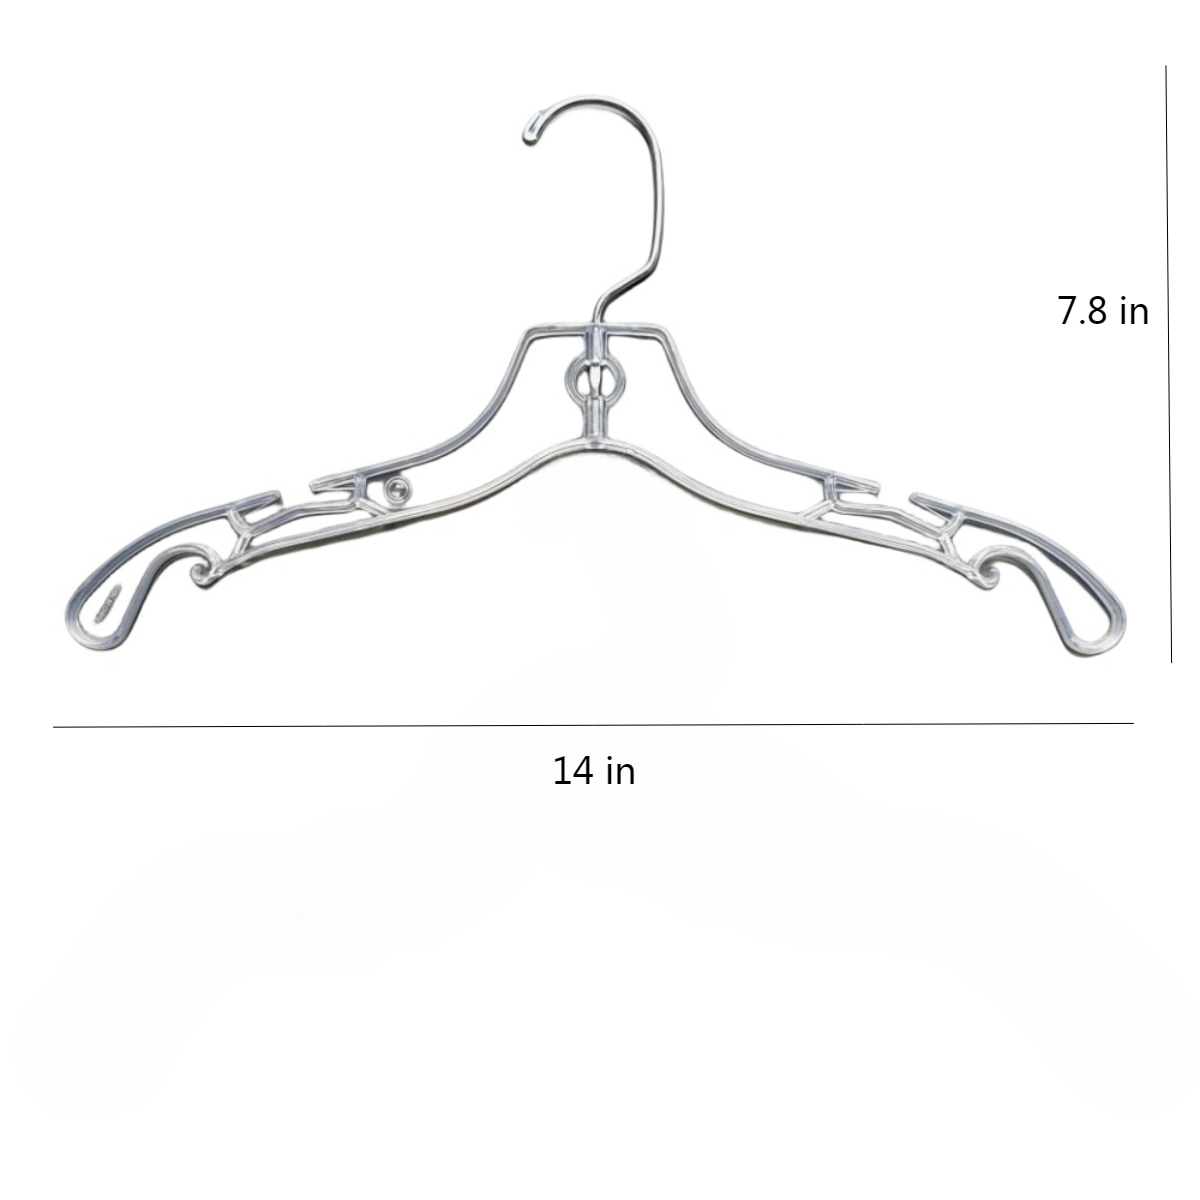 100-Pack WisdomFur Premium Kids Plastic Hangers - Durable Non-Slip, Plastic Baby Hangers, Baby Clothes Hanger - Newborn, Baby, Toddler and Kids Hanger for Closet - For Home and Closet Organization (Clear)